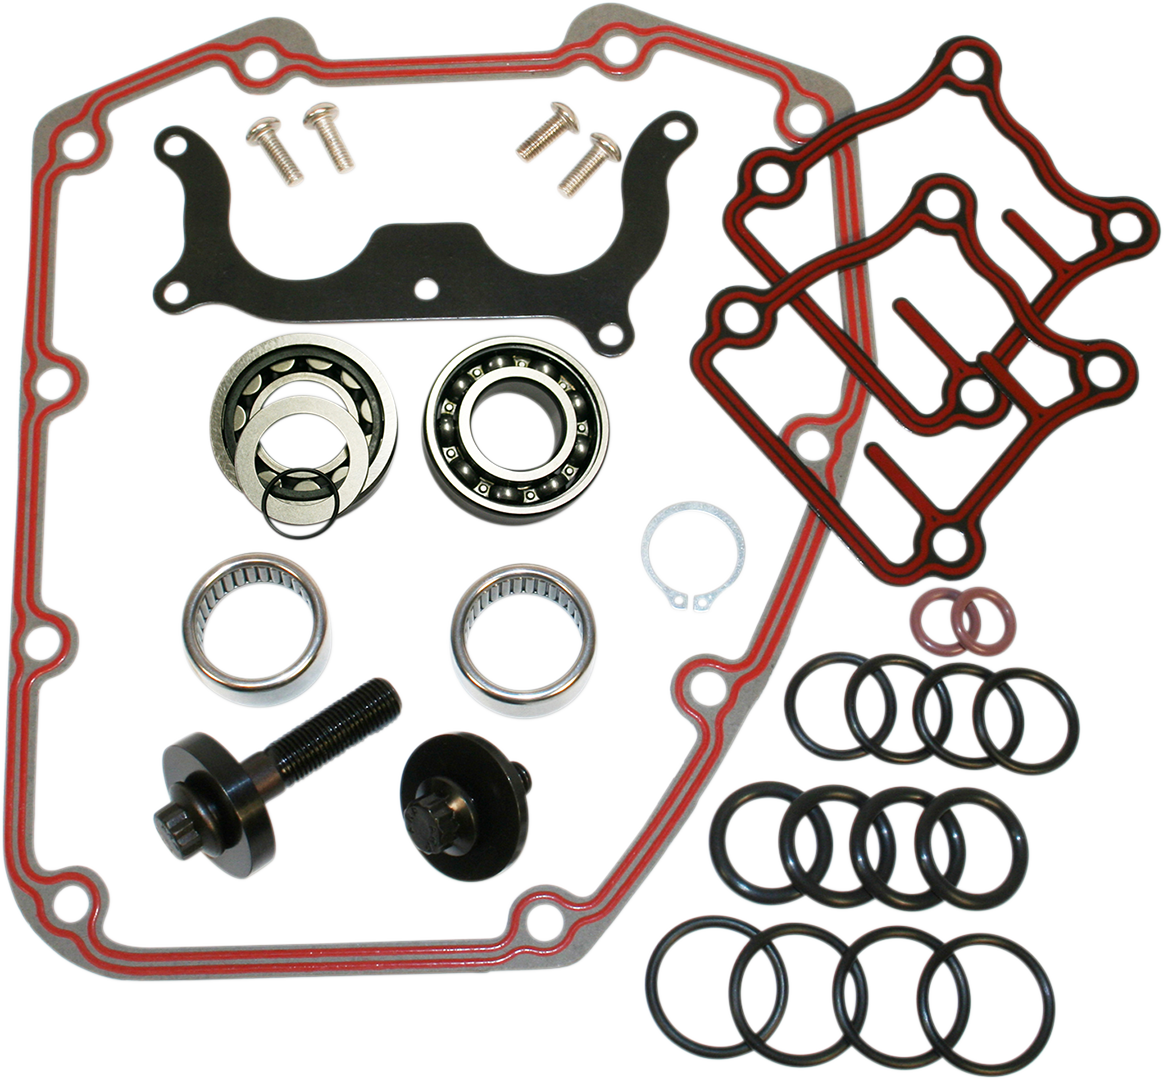 Feuling Chain Drive Camshaft Installation Kit 1999-2006 Harley Softail Models